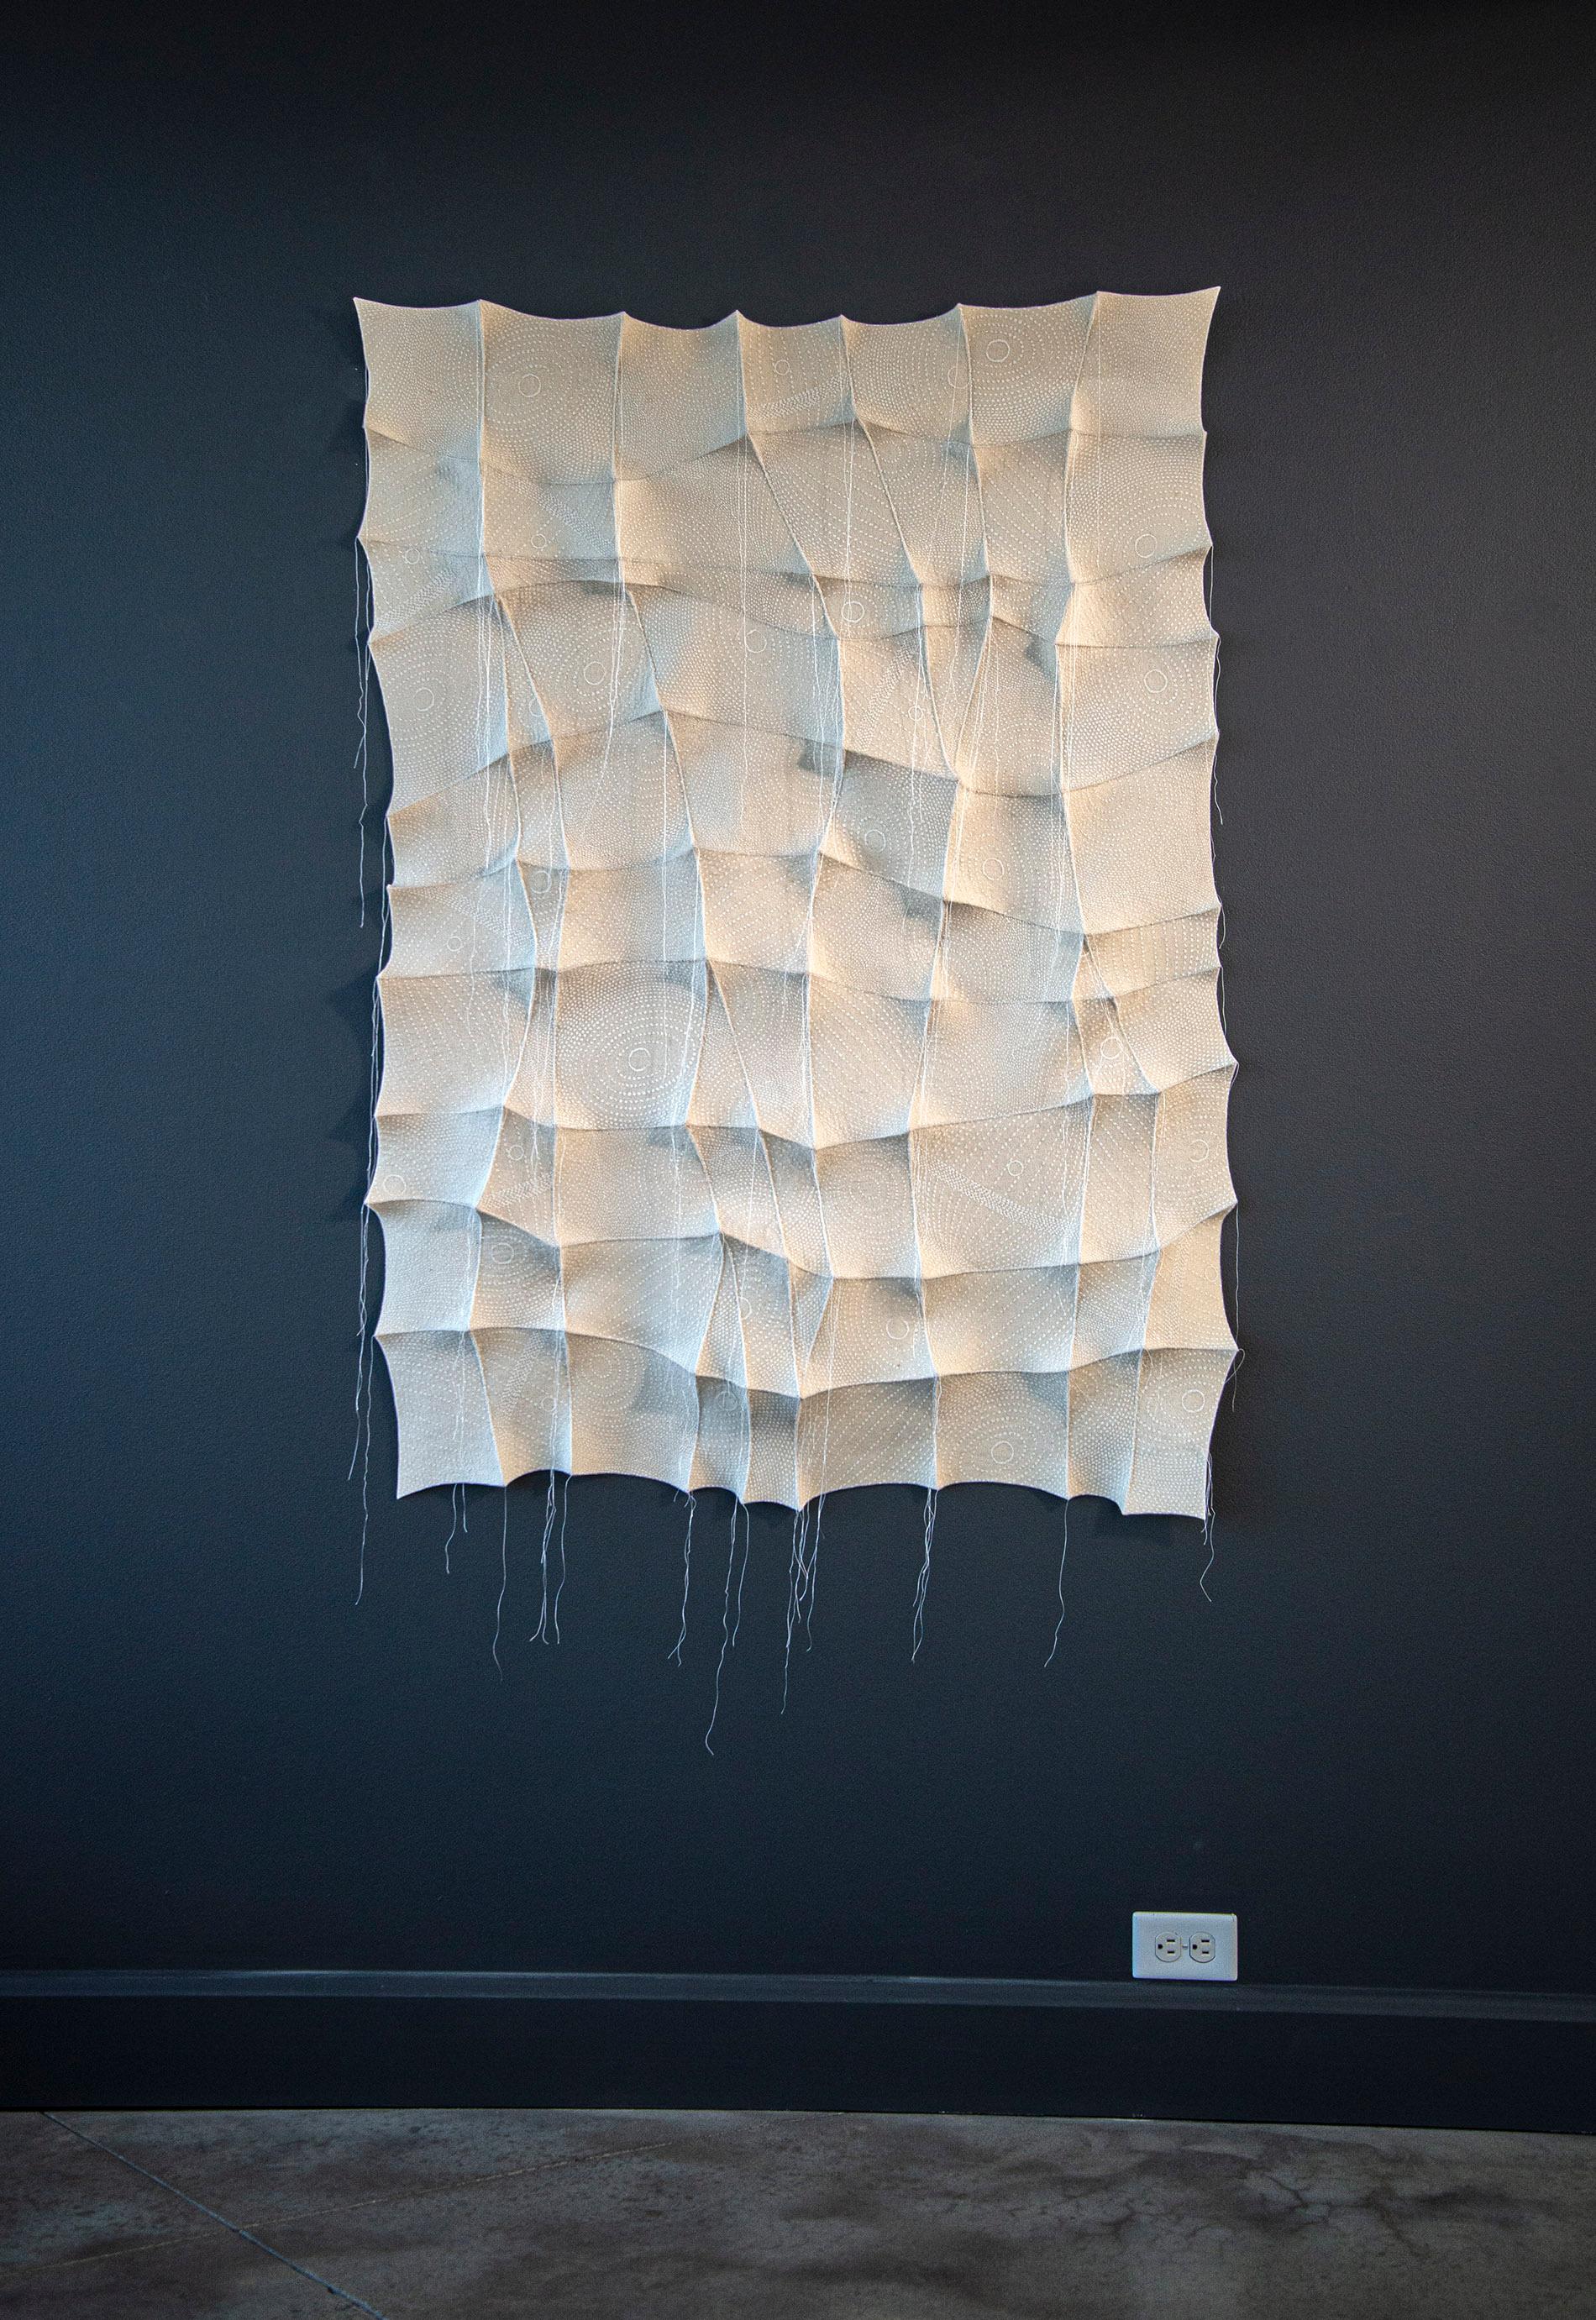 In this elegant monochromatic white tapestry by fabric artist Chung-Im Kim, finely detailed patterns swirl around the fabric. Kim’s organic form is inspired by the patterns she sees in nature. The white ink on white fabric provides a subtle texture.